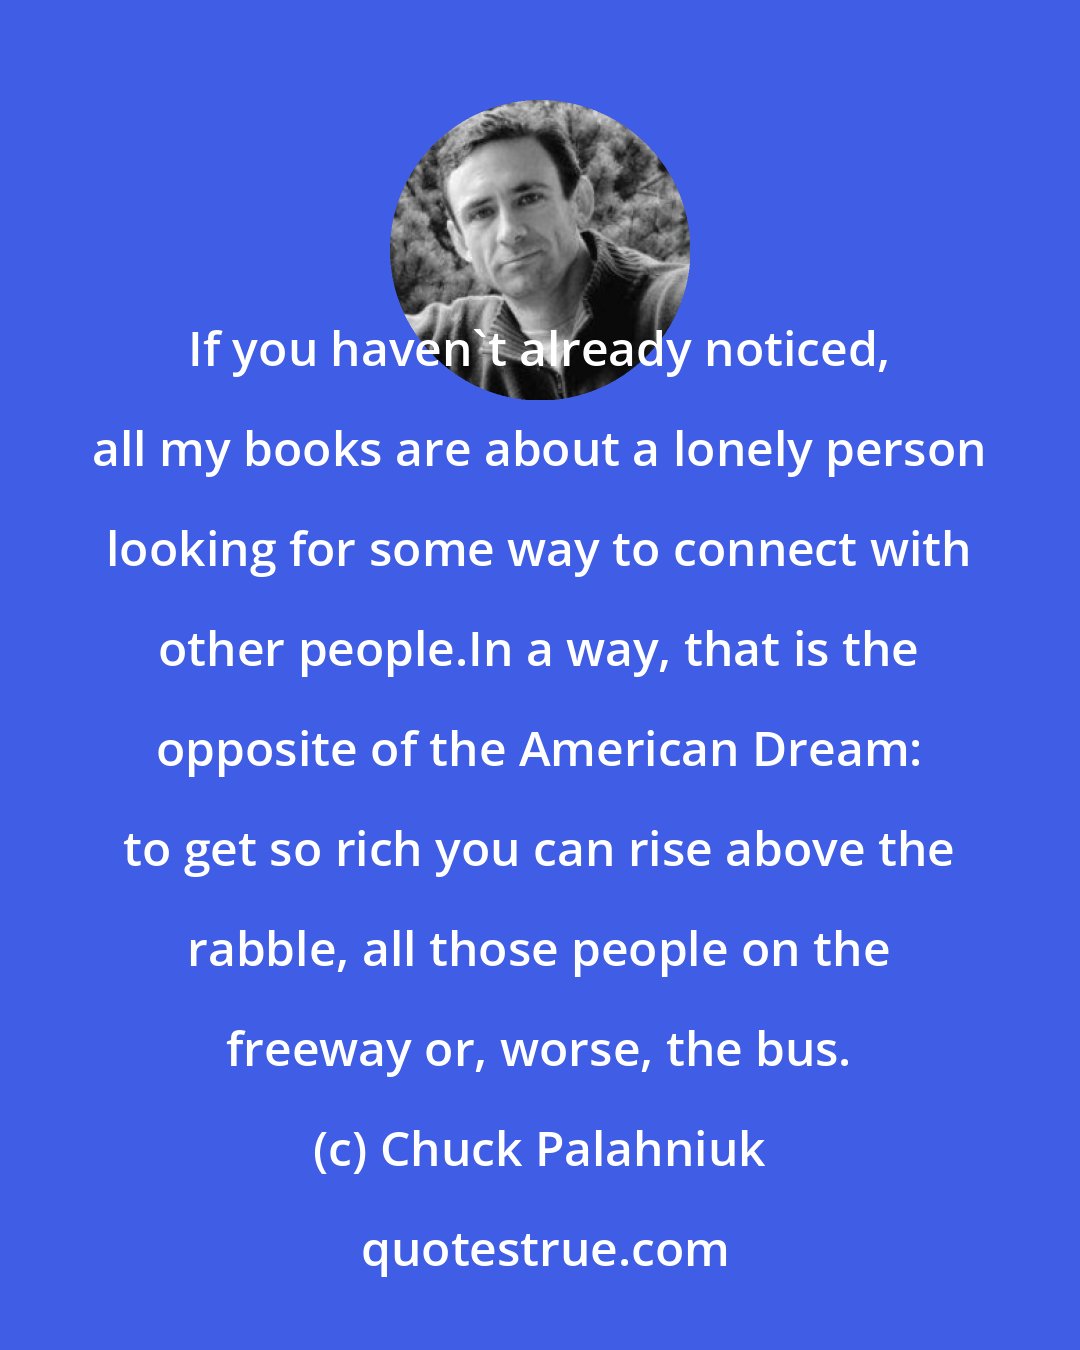 Chuck Palahniuk: If you haven't already noticed, all my books are about a lonely person looking for some way to connect with other people.In a way, that is the opposite of the American Dream: to get so rich you can rise above the rabble, all those people on the freeway or, worse, the bus.